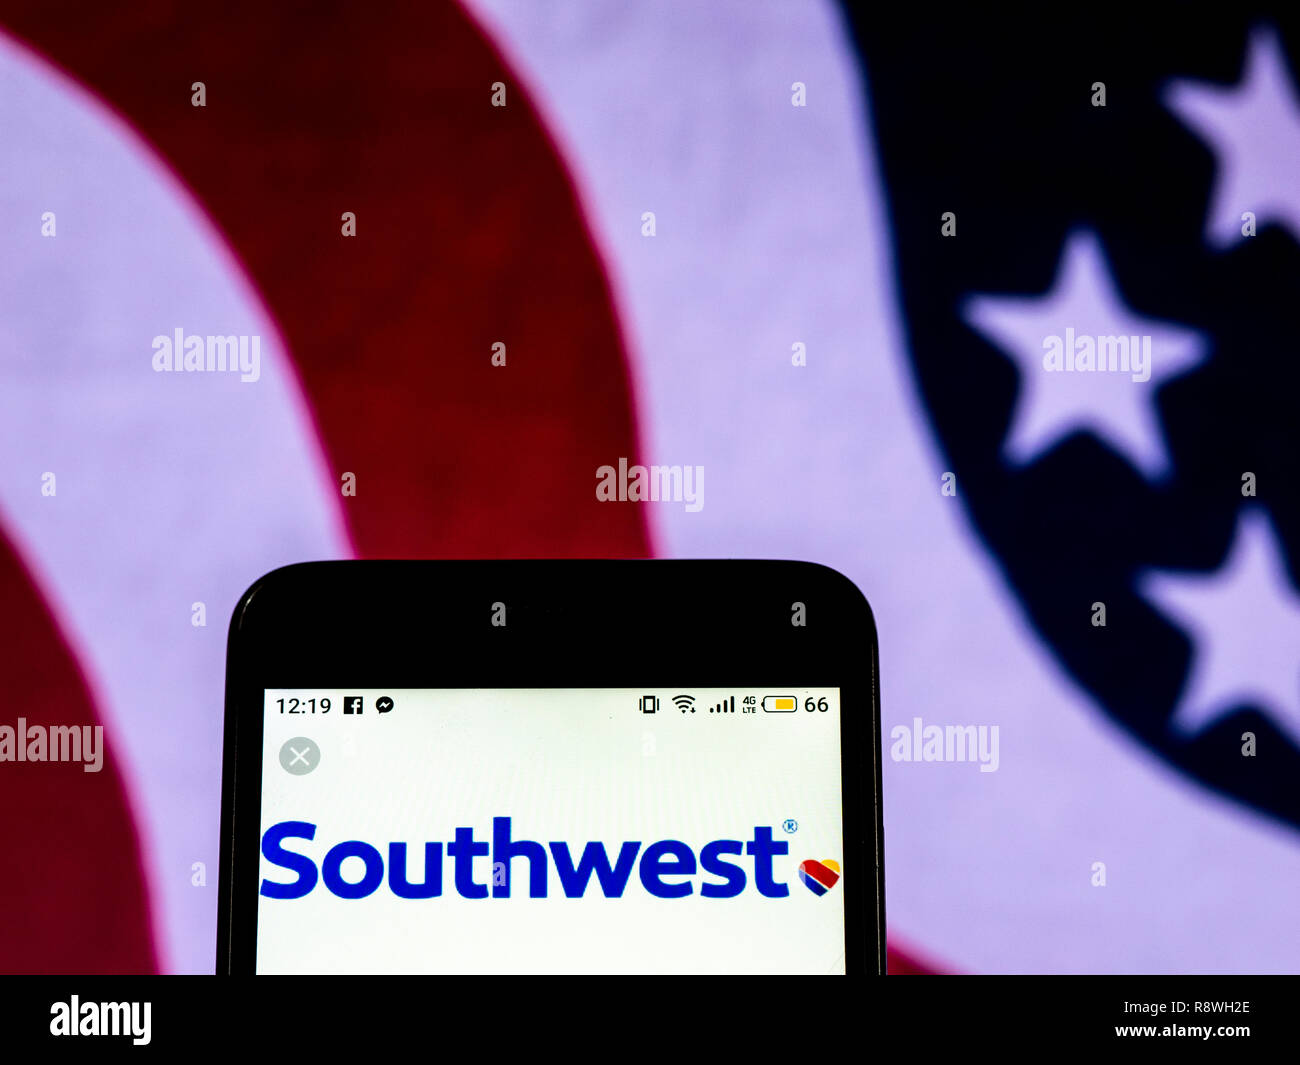 Southwest Airlines logo seen displayed on smart phone Stock Photo